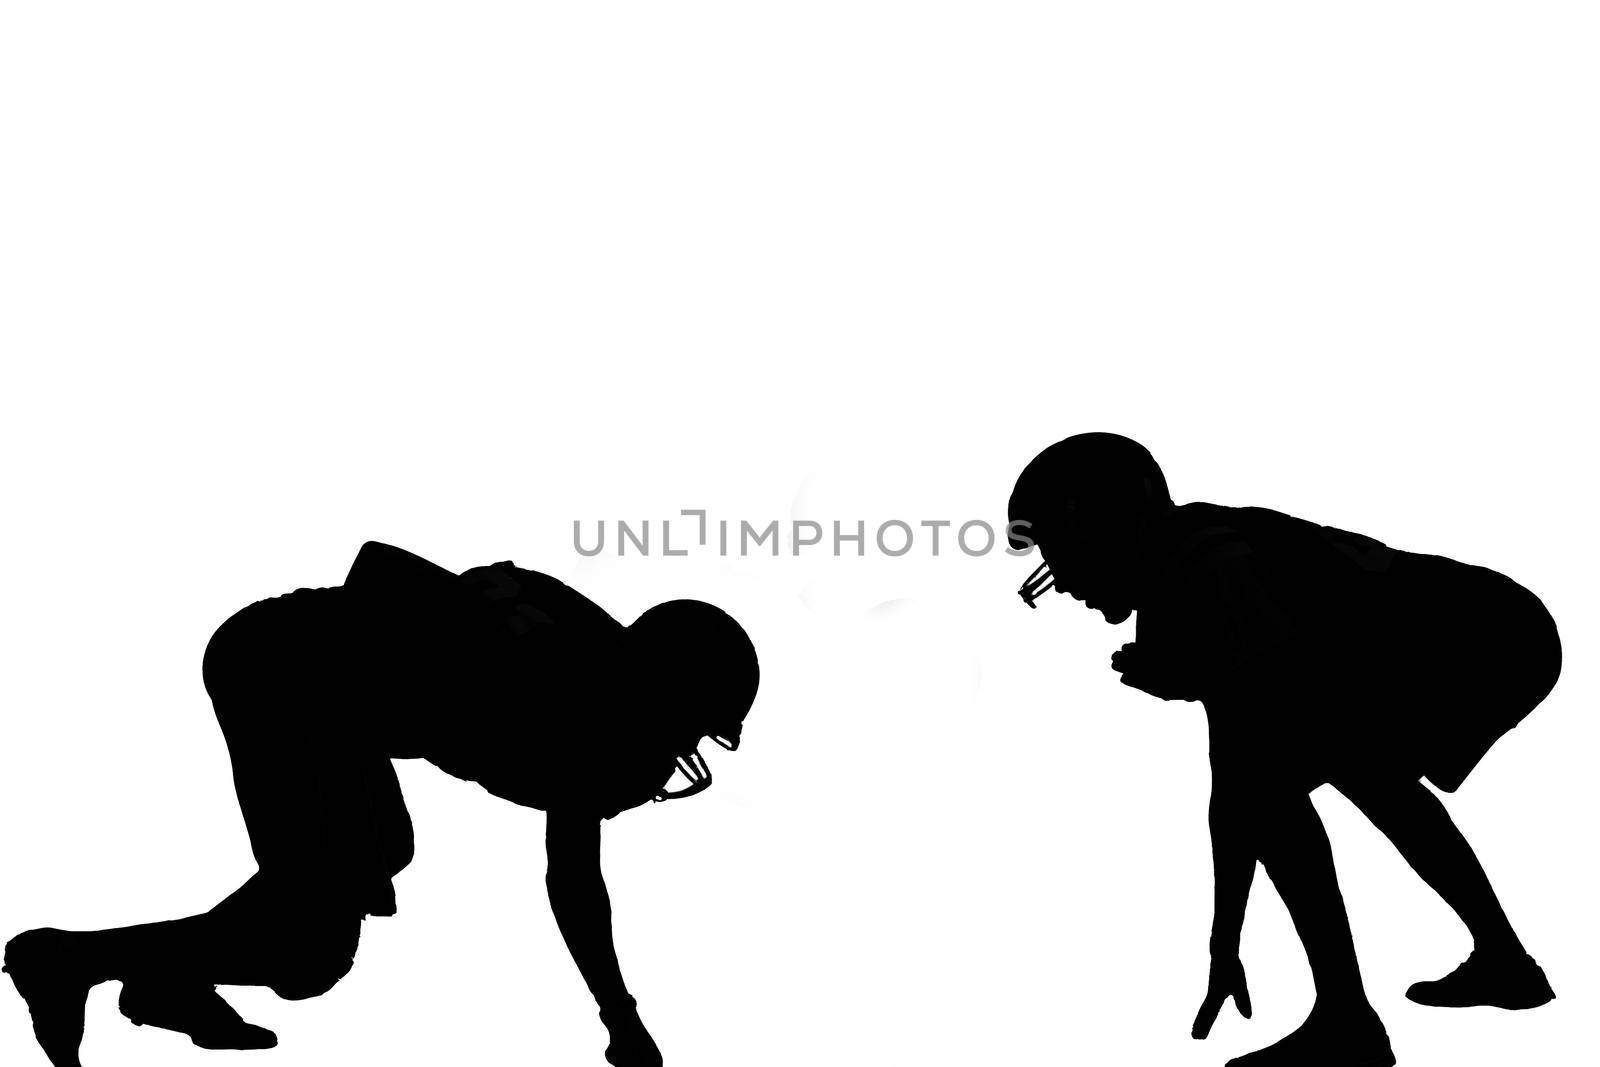 American football player in action, silhouette isolated on white background. Sportsman in full equipment on court. Rugby sport man, popular super star collage sport